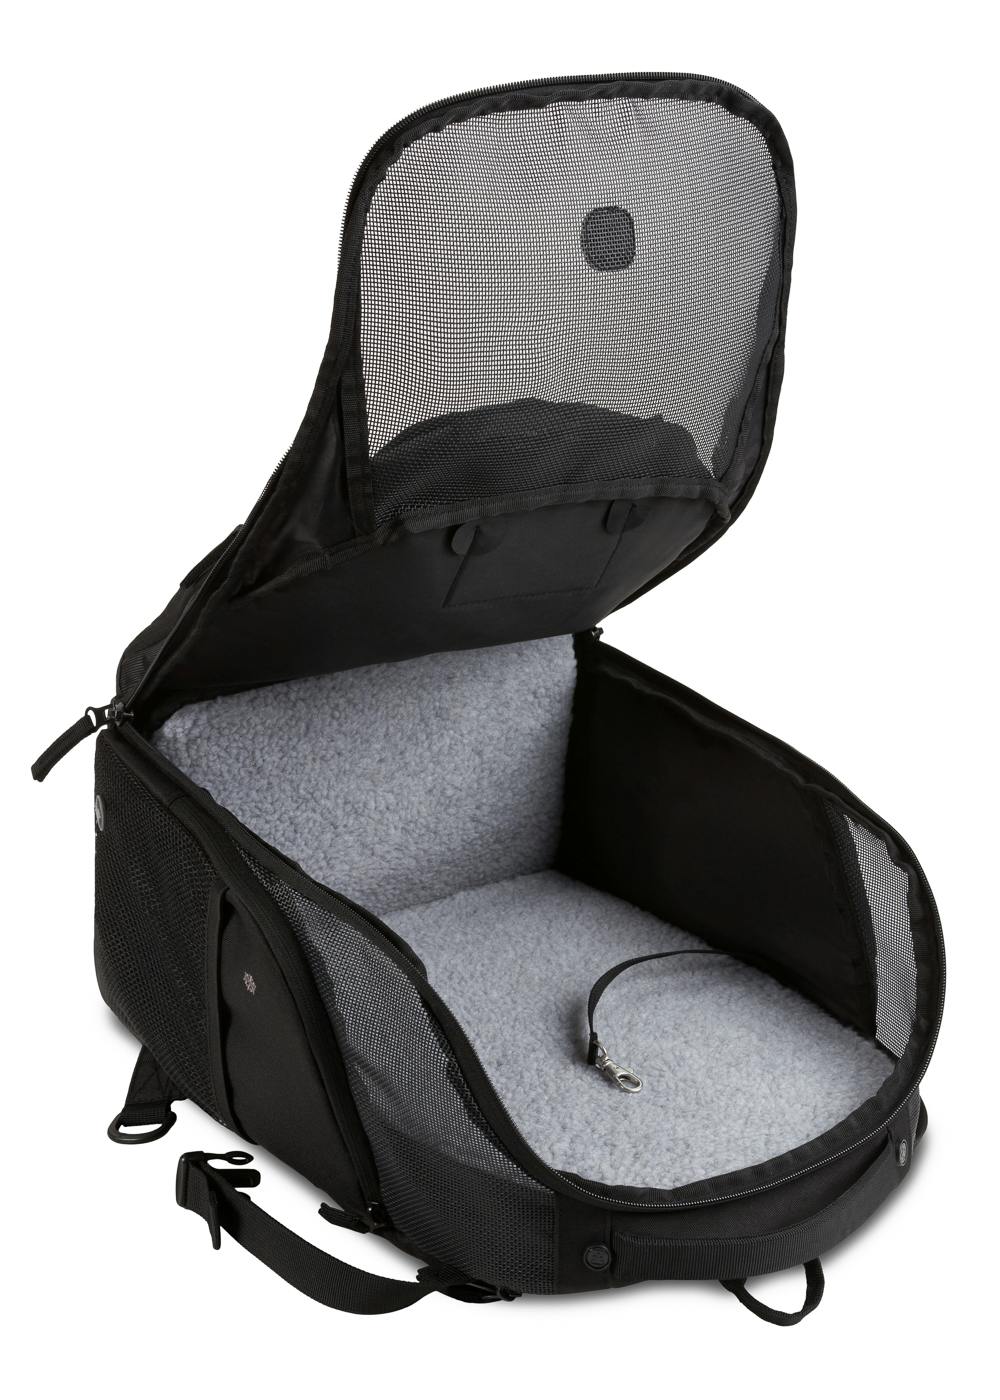 SWISSGEAR 3326 Getaway Pet Carrier - Open View with Feature Callouts